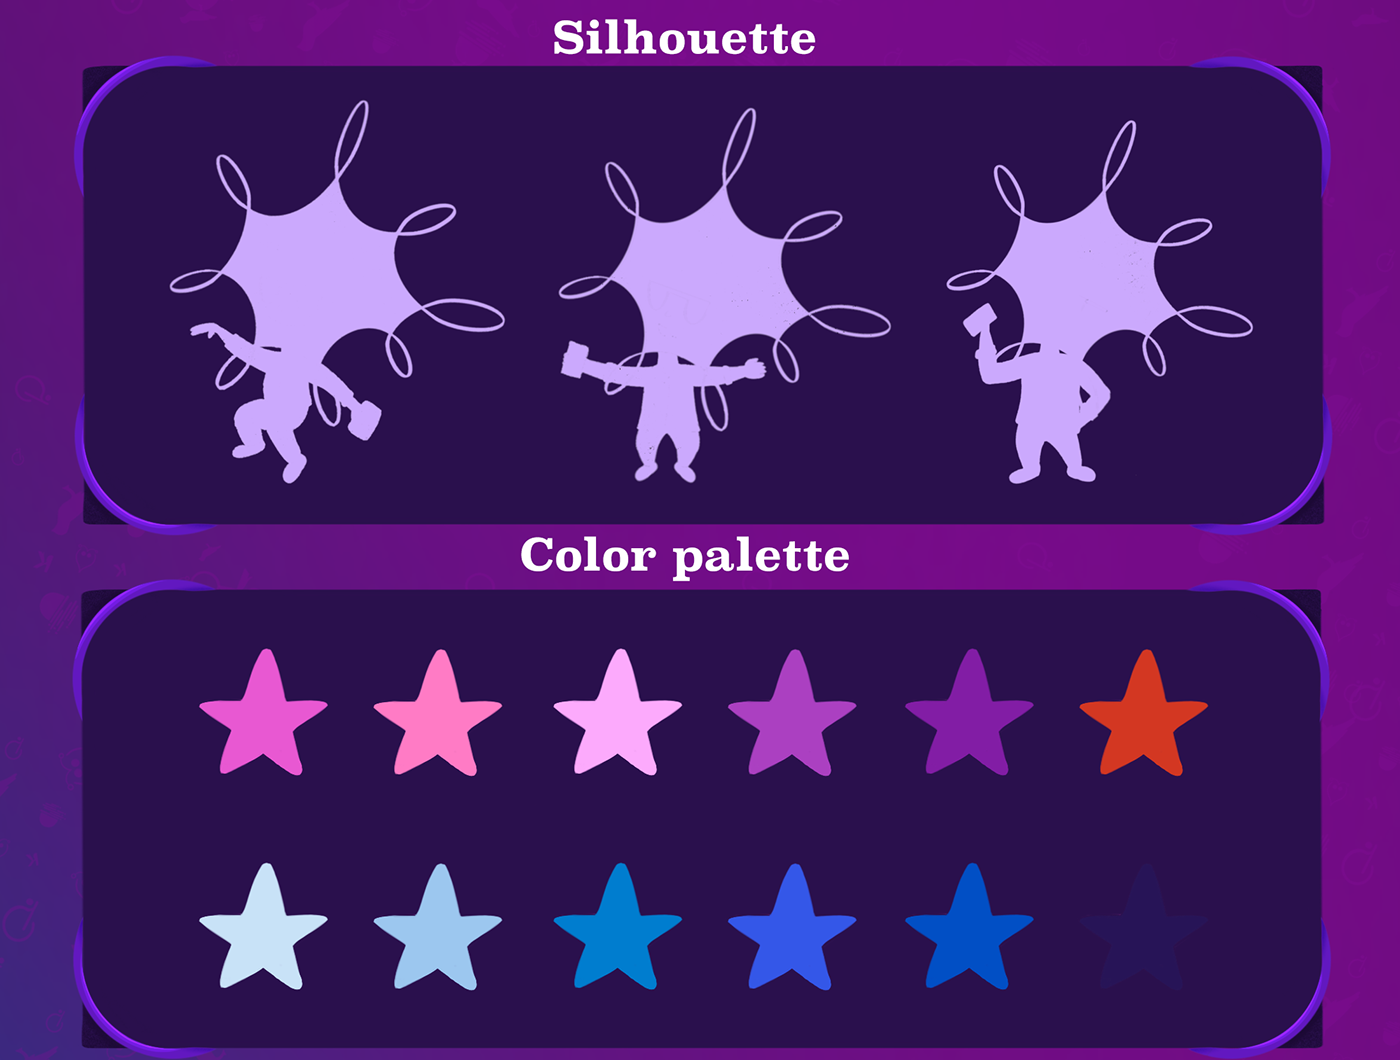 Brand character silhouette and color palette